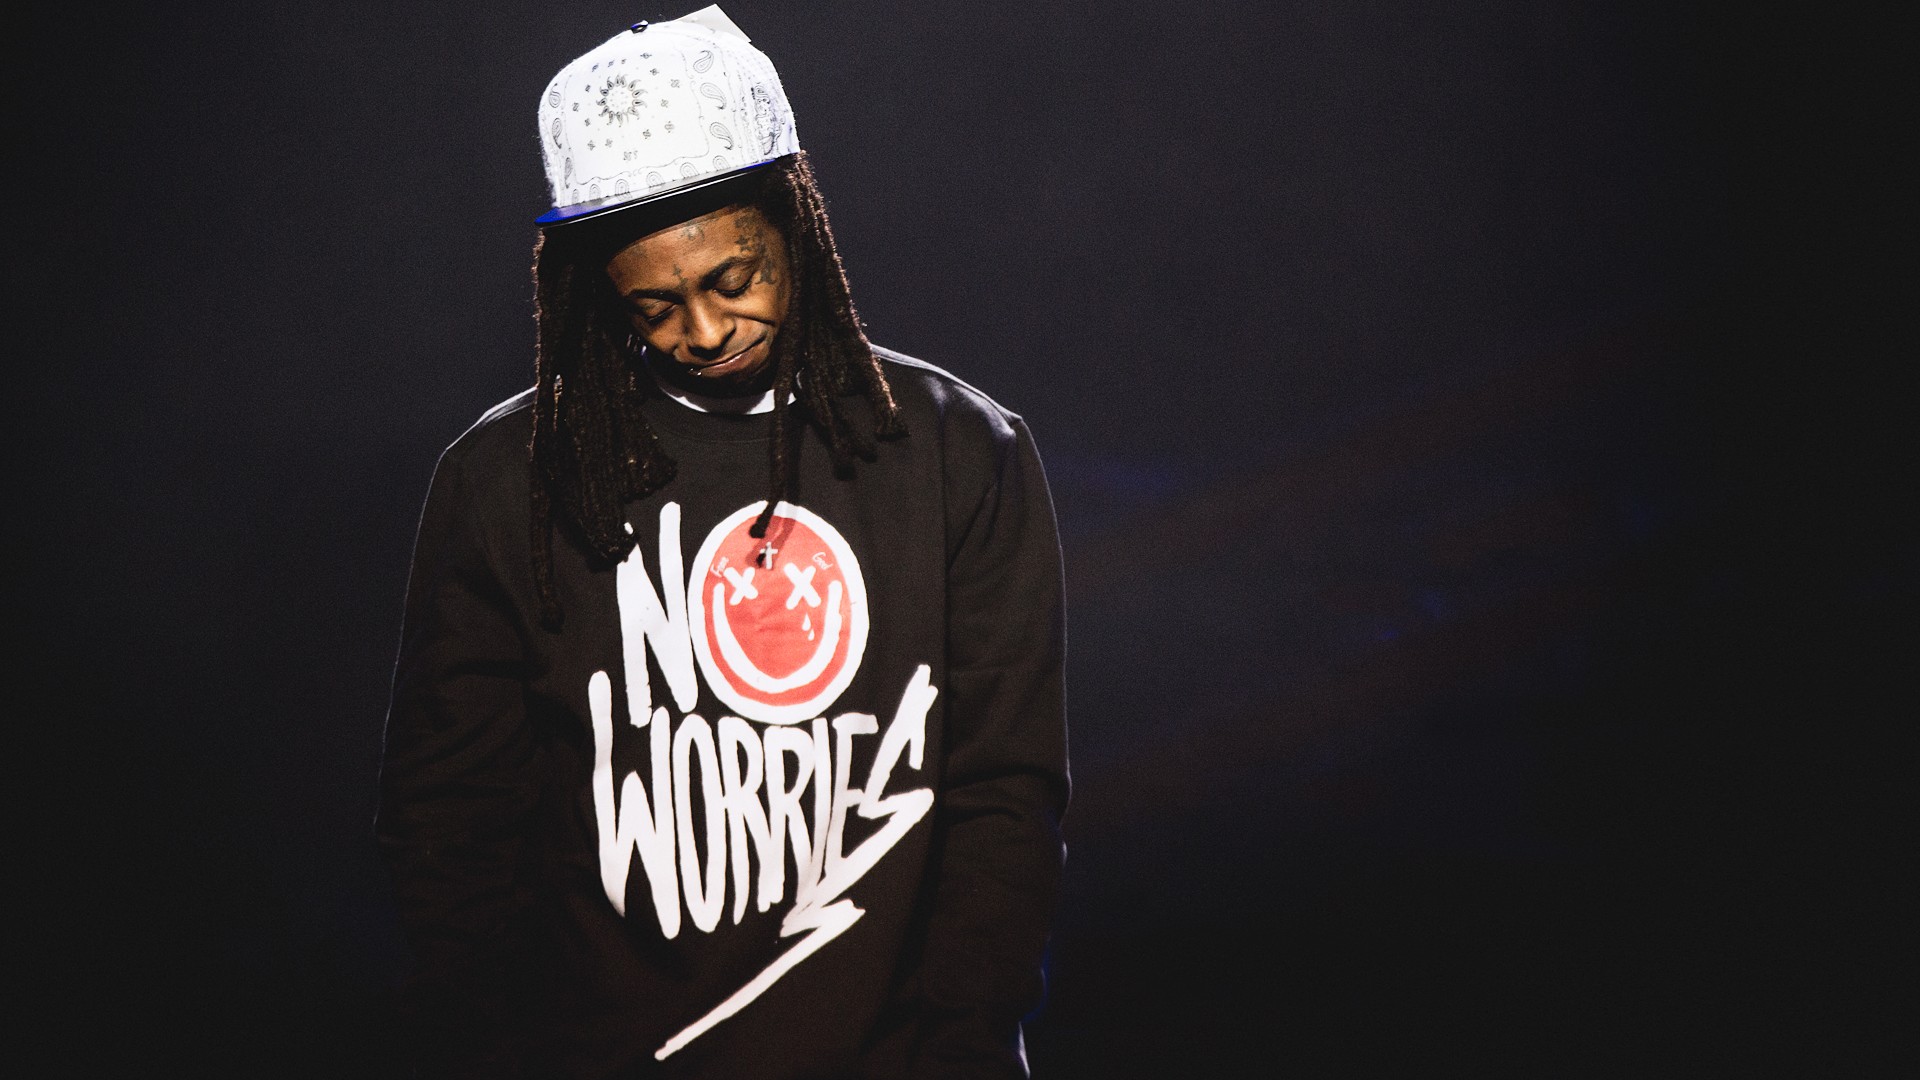 Download Lil Wayne HD 9 background for your phone iPhone android